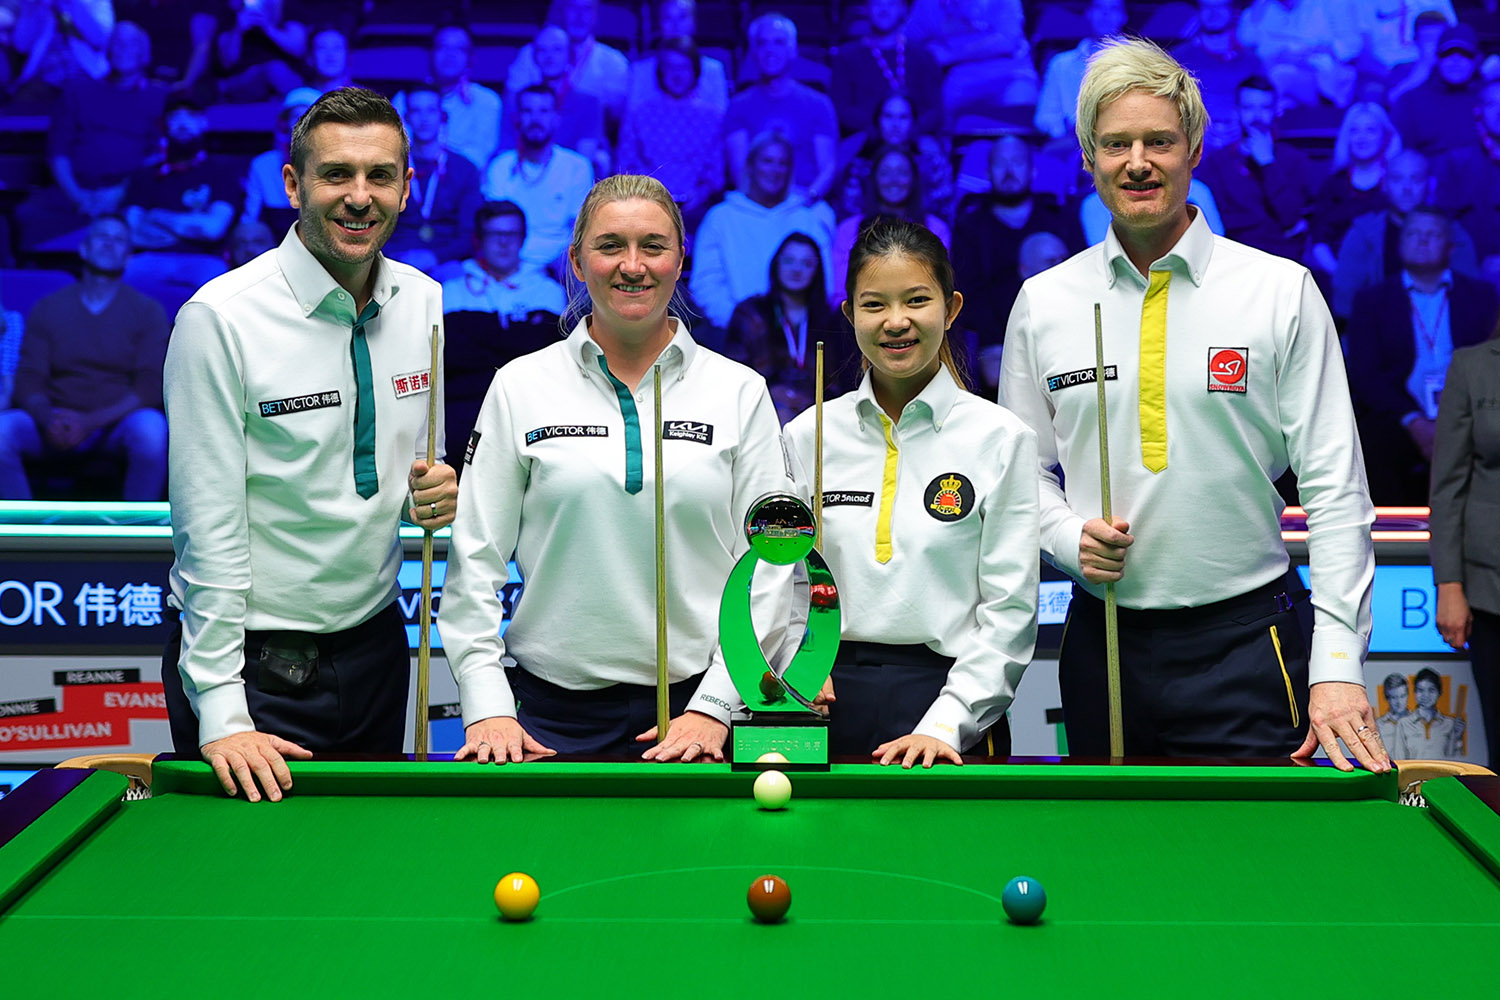 Where To Watch - Champion of Champions Snooker